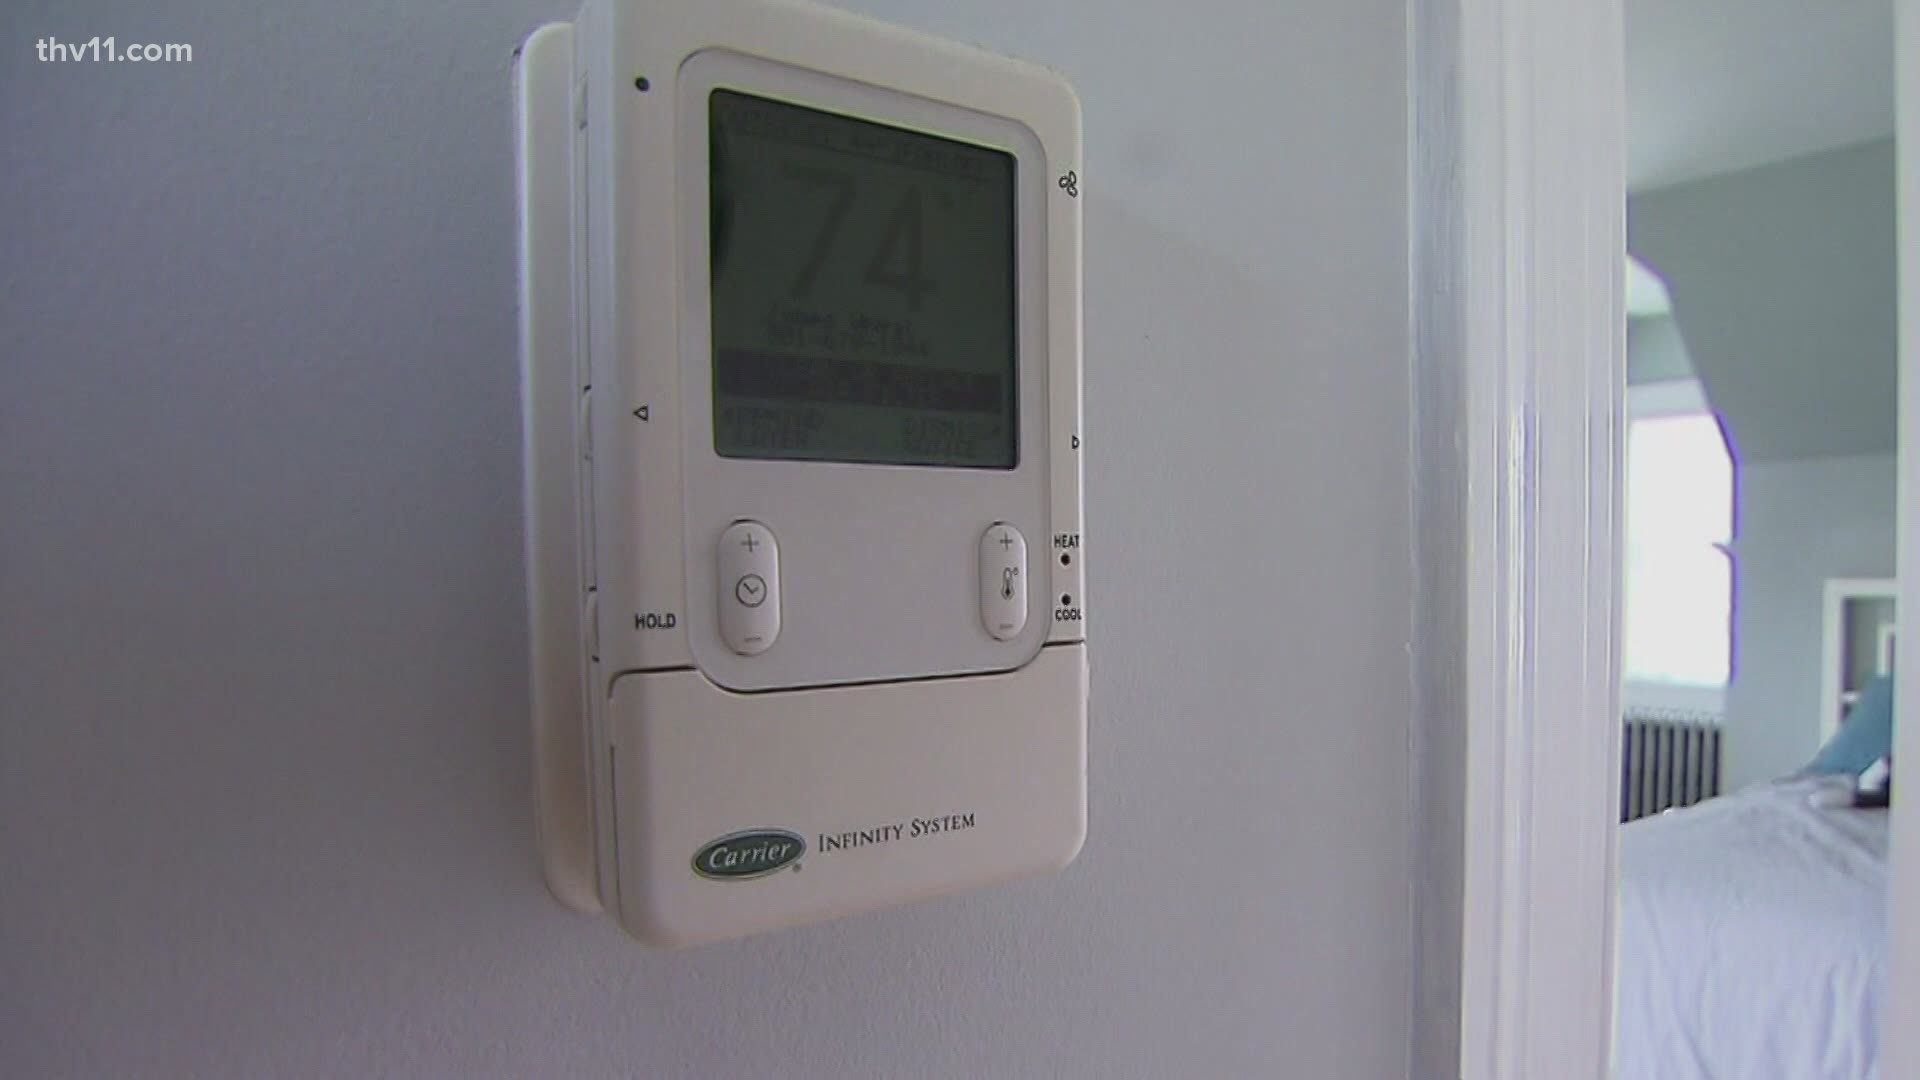 centerpoint-try-to-keep-your-thermostat-between-60-65-degrees-thv11